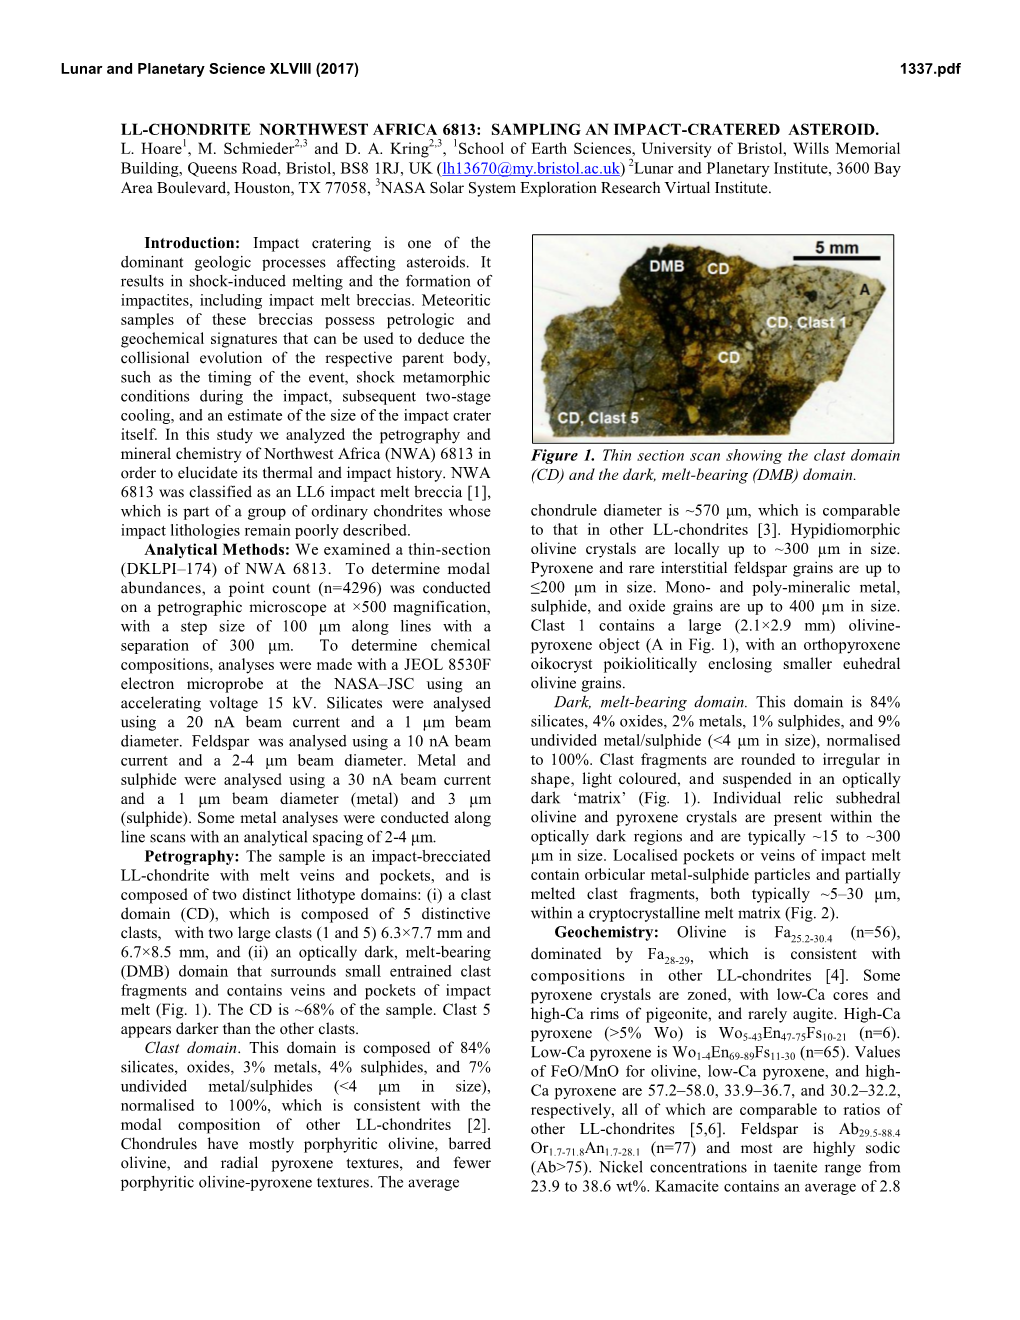 Ll-Chondrite Northwest Africa 6813: Sampling an Impact-Cratered Asteroid